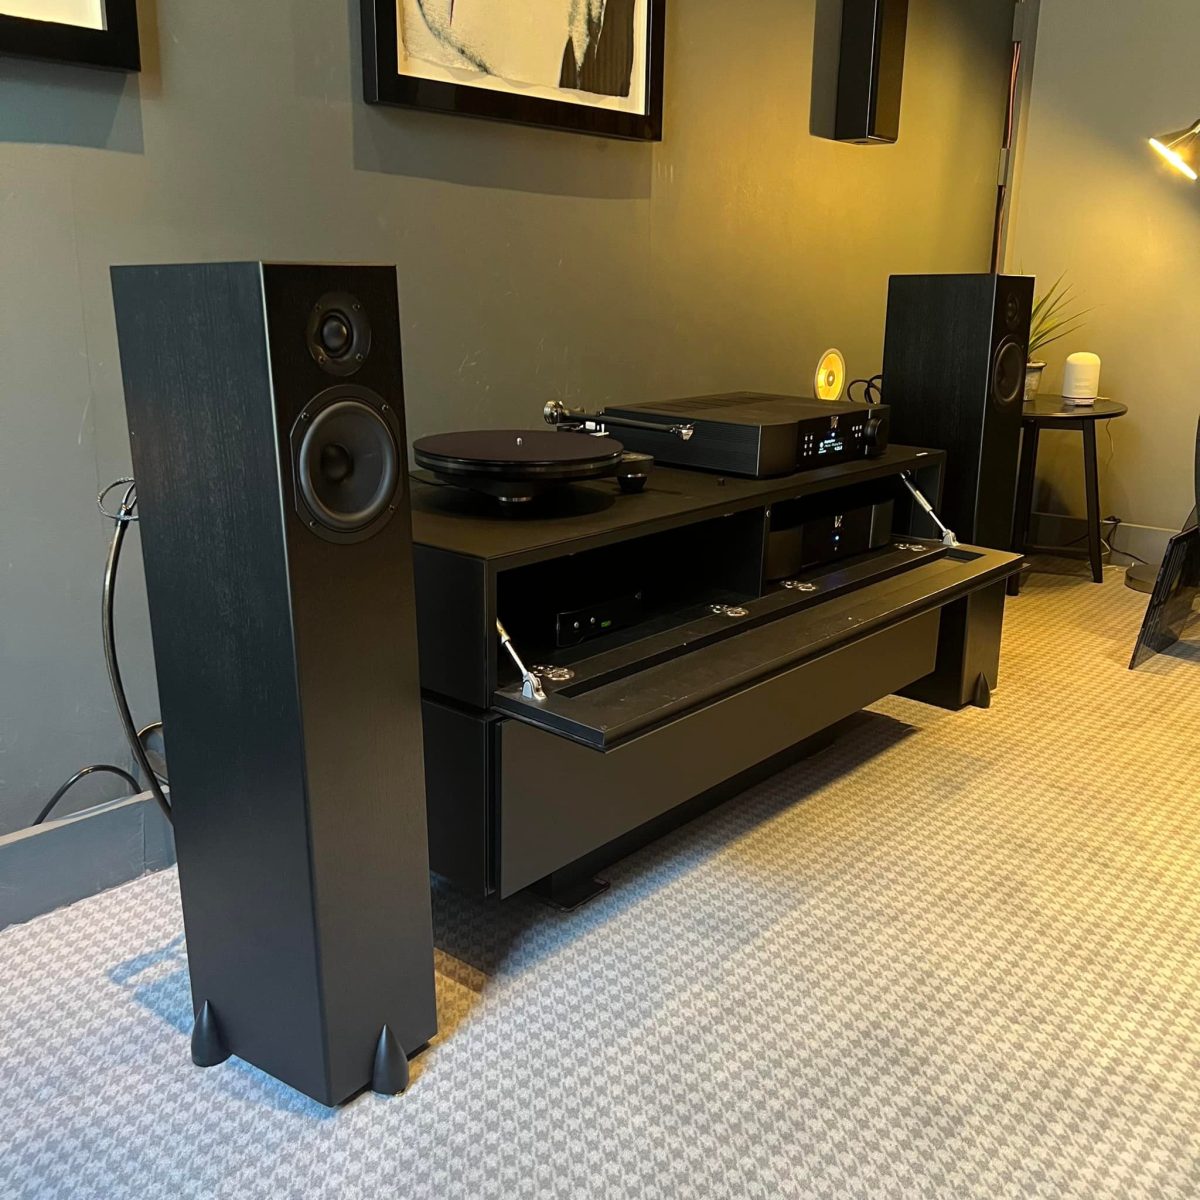 Spectral Loud & Clear demo room